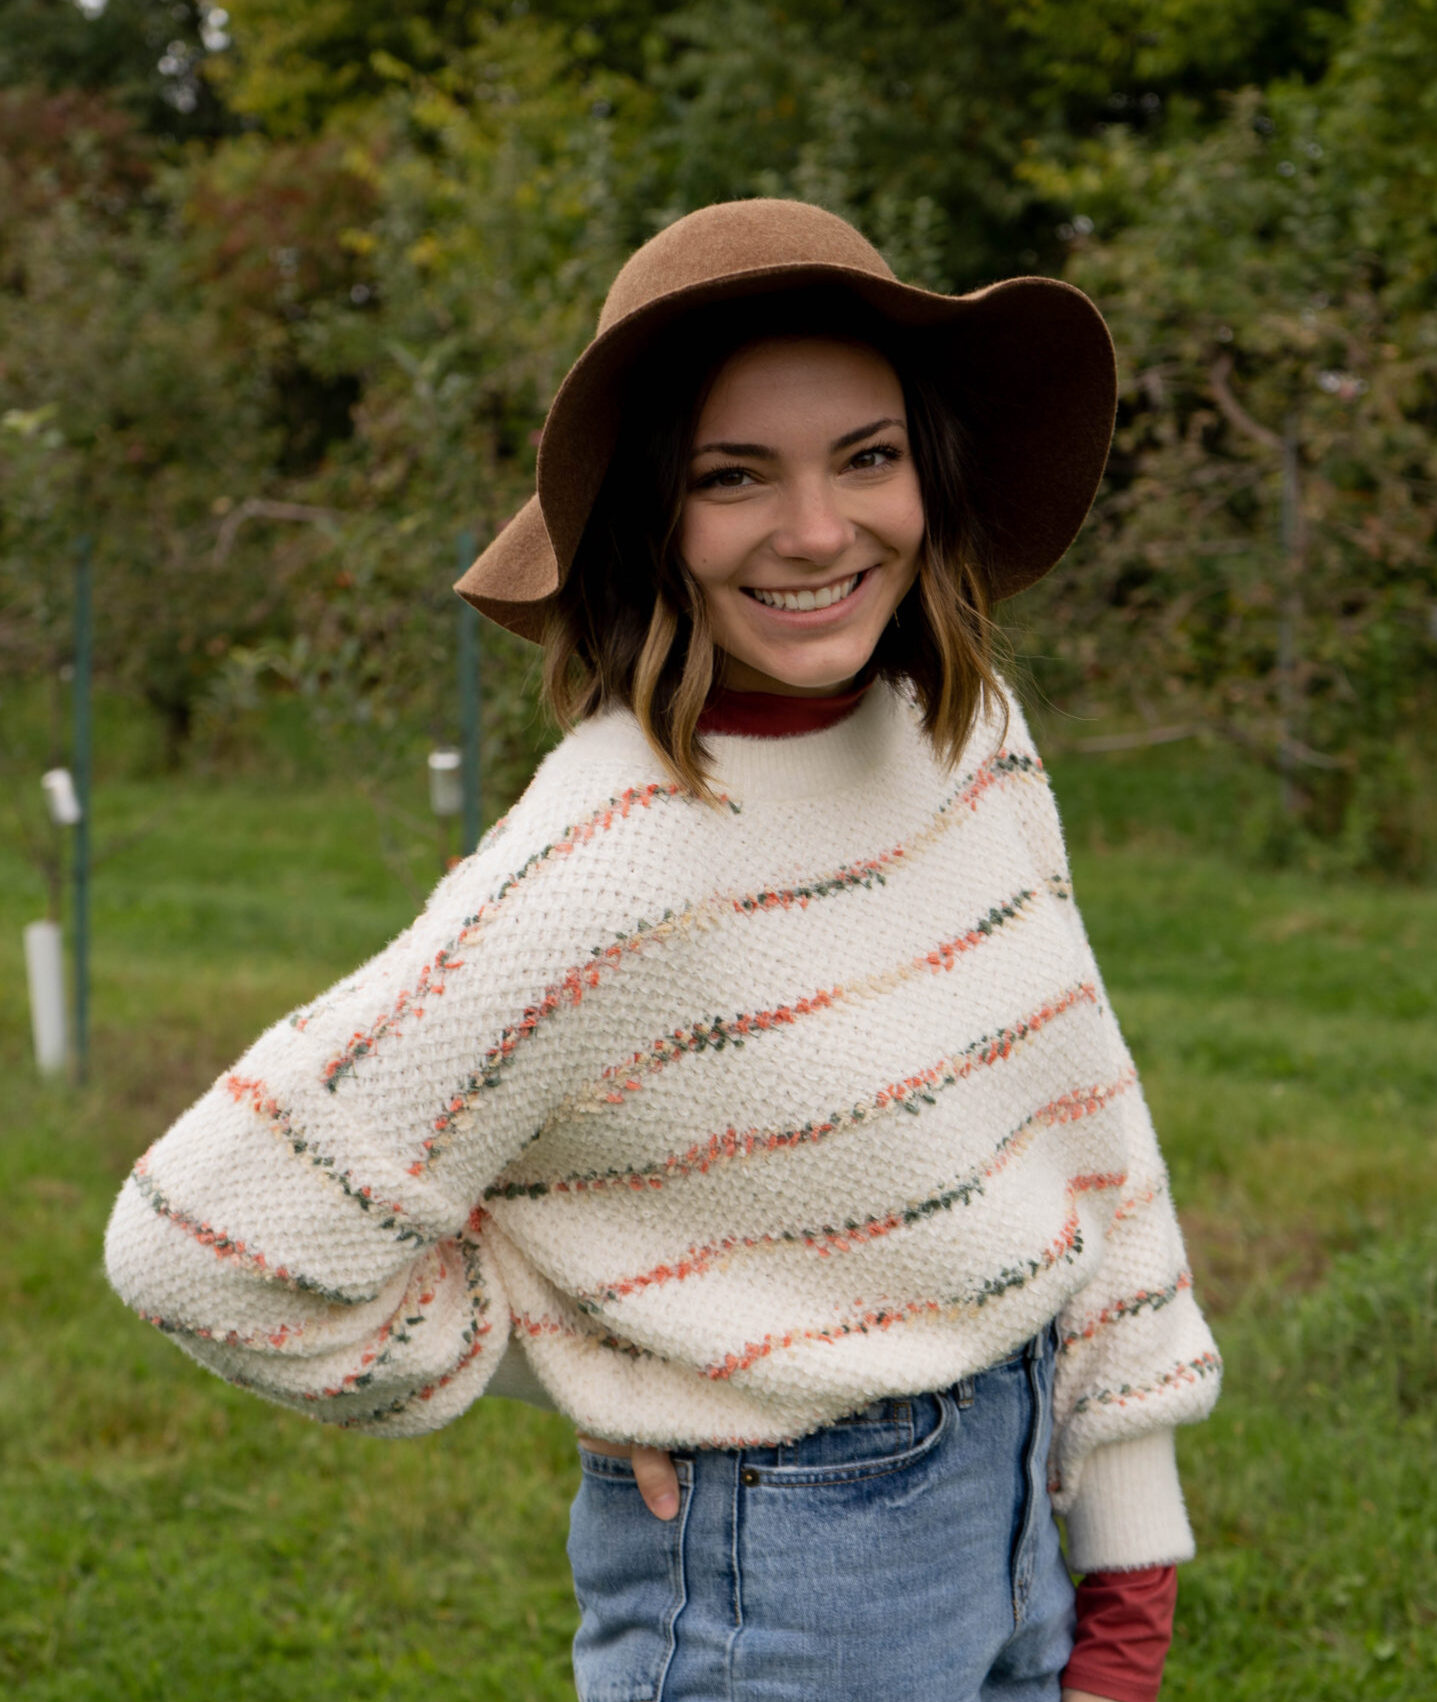 White woman with shoulder length brown hair. She is wearing a striped white sweater, blue jeans, and a lovely brown hair. She is standing in a green field.